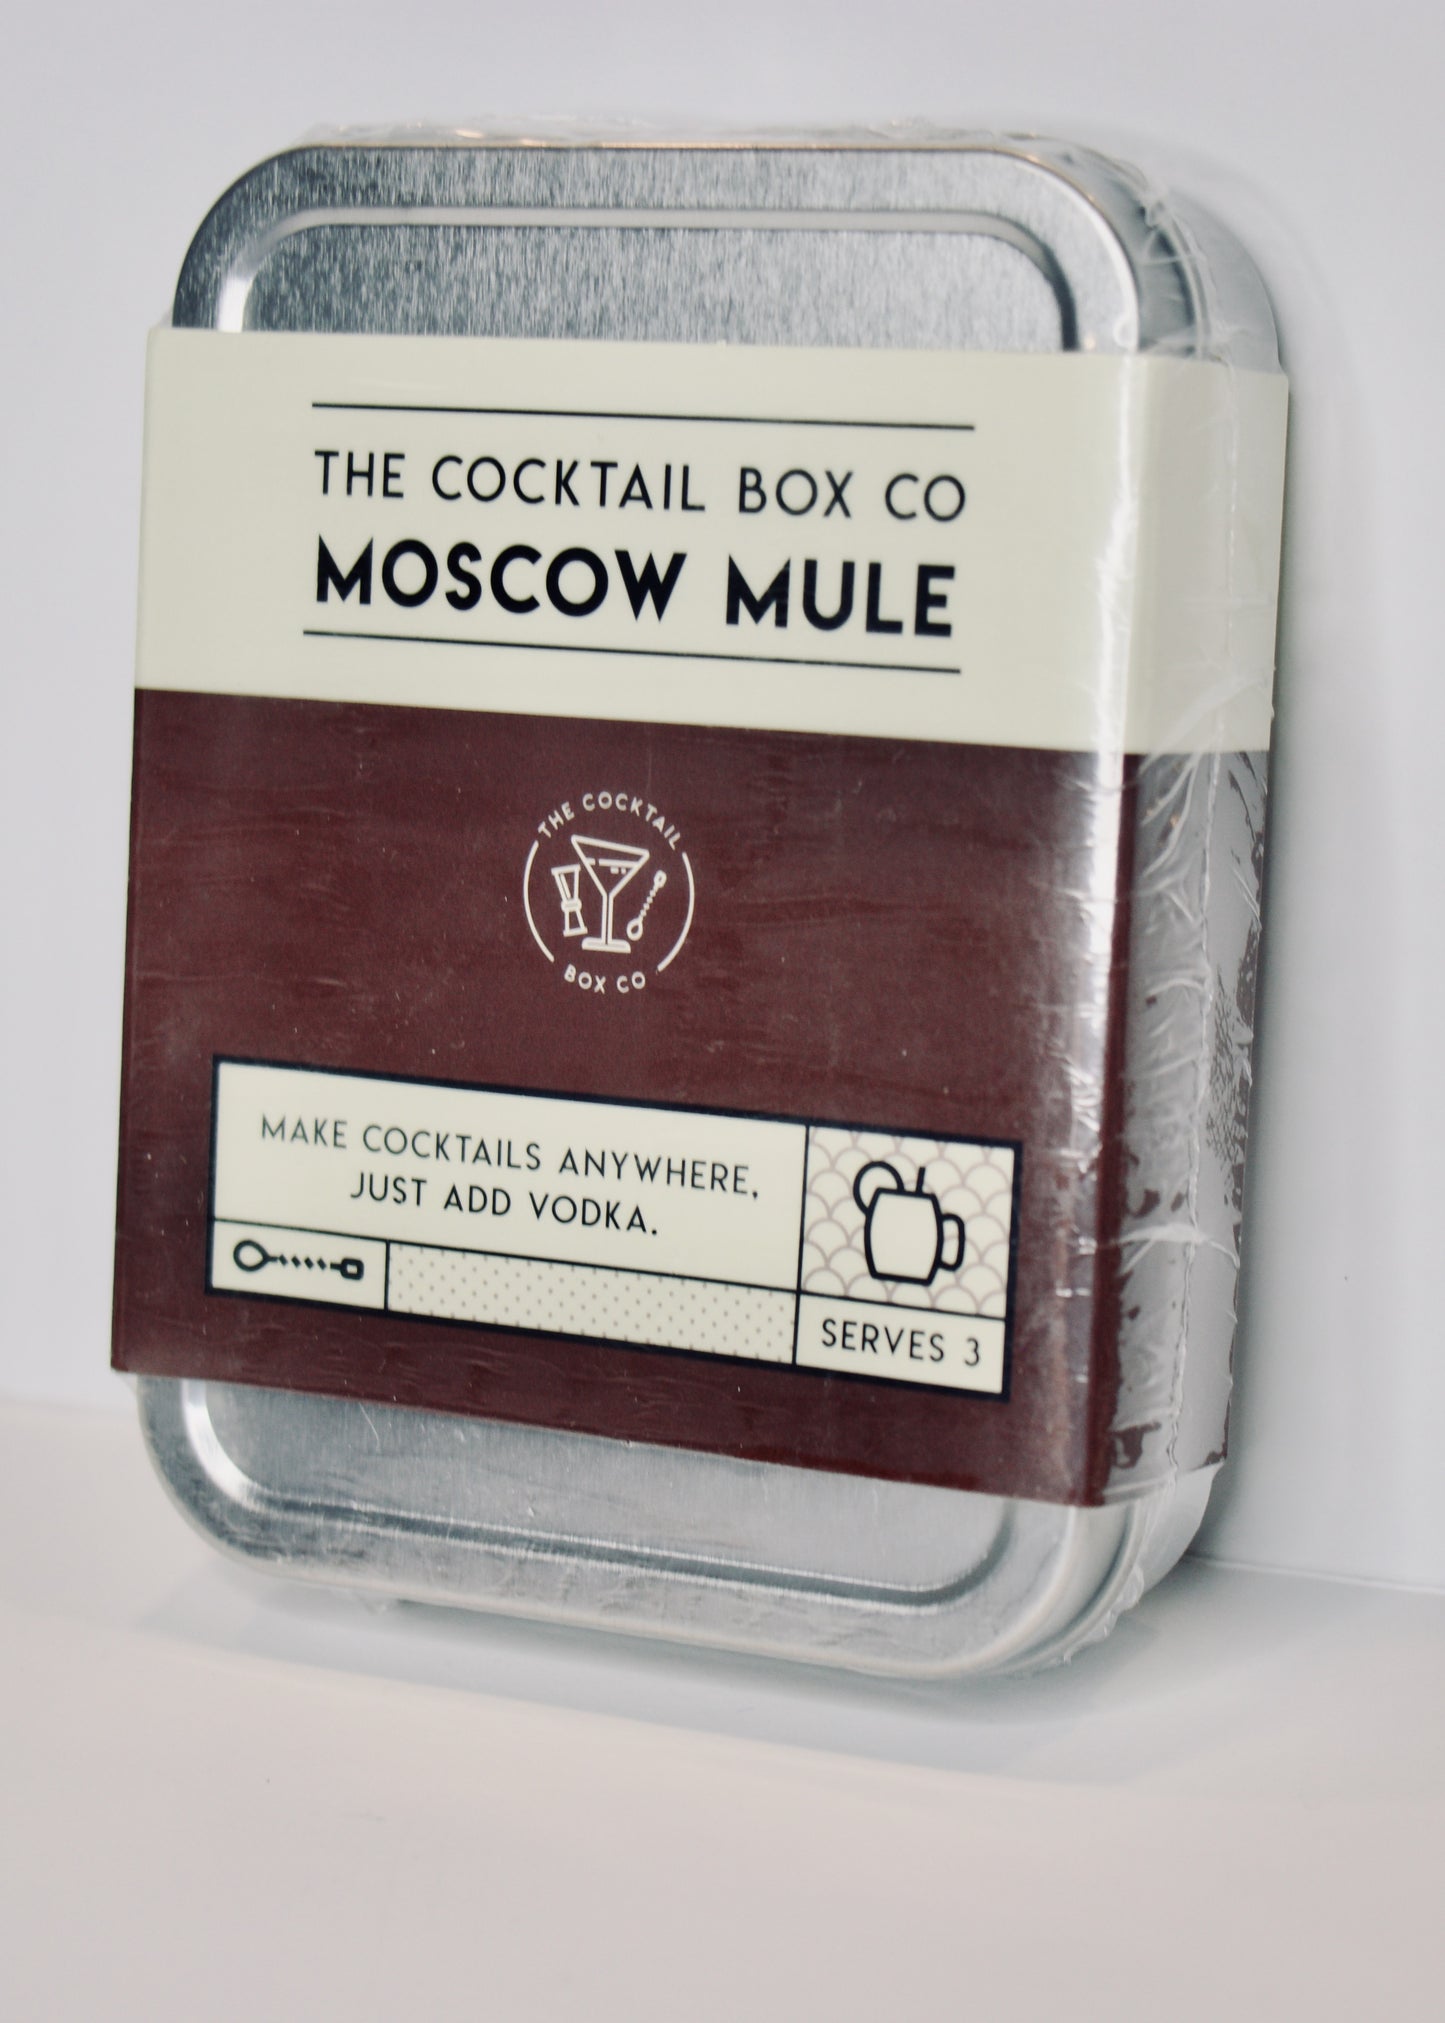 The Cocktail Box Co. Moscow Mule